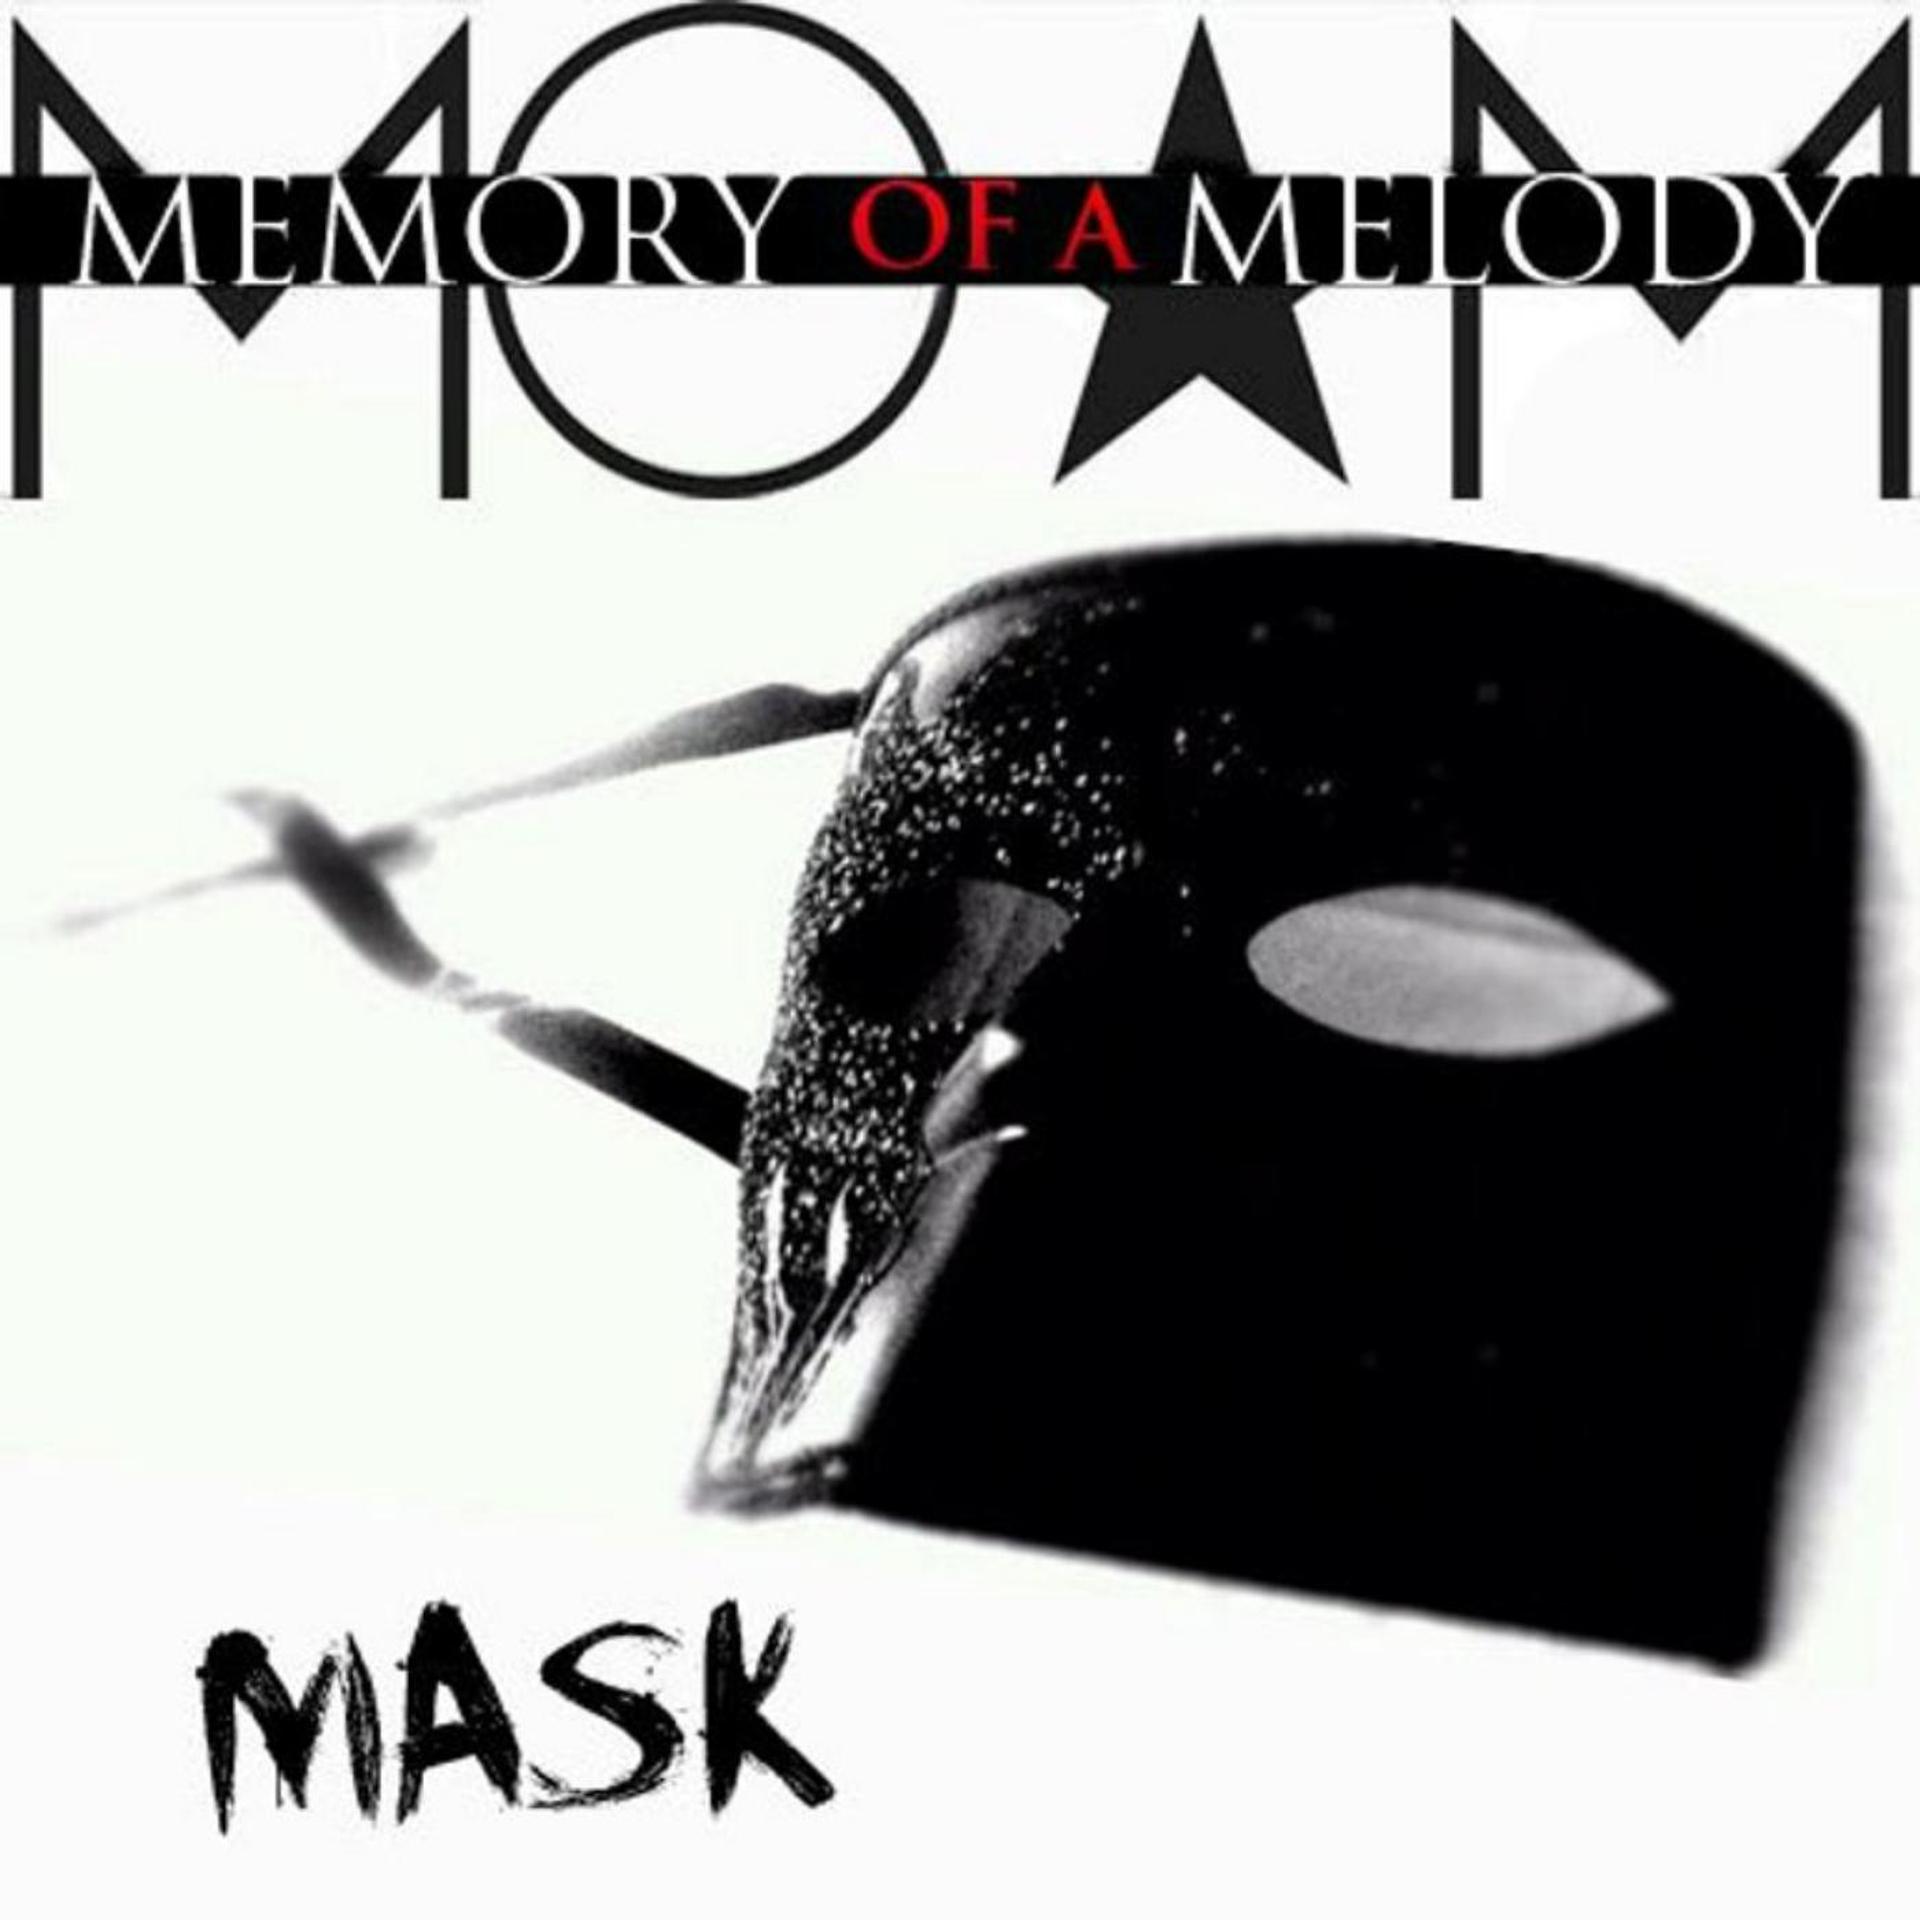 Memory of a Melody. Memory of a Melody Mask. Memory of a Melody Band. Memory of a Melody Mask 2021. Оф мемори